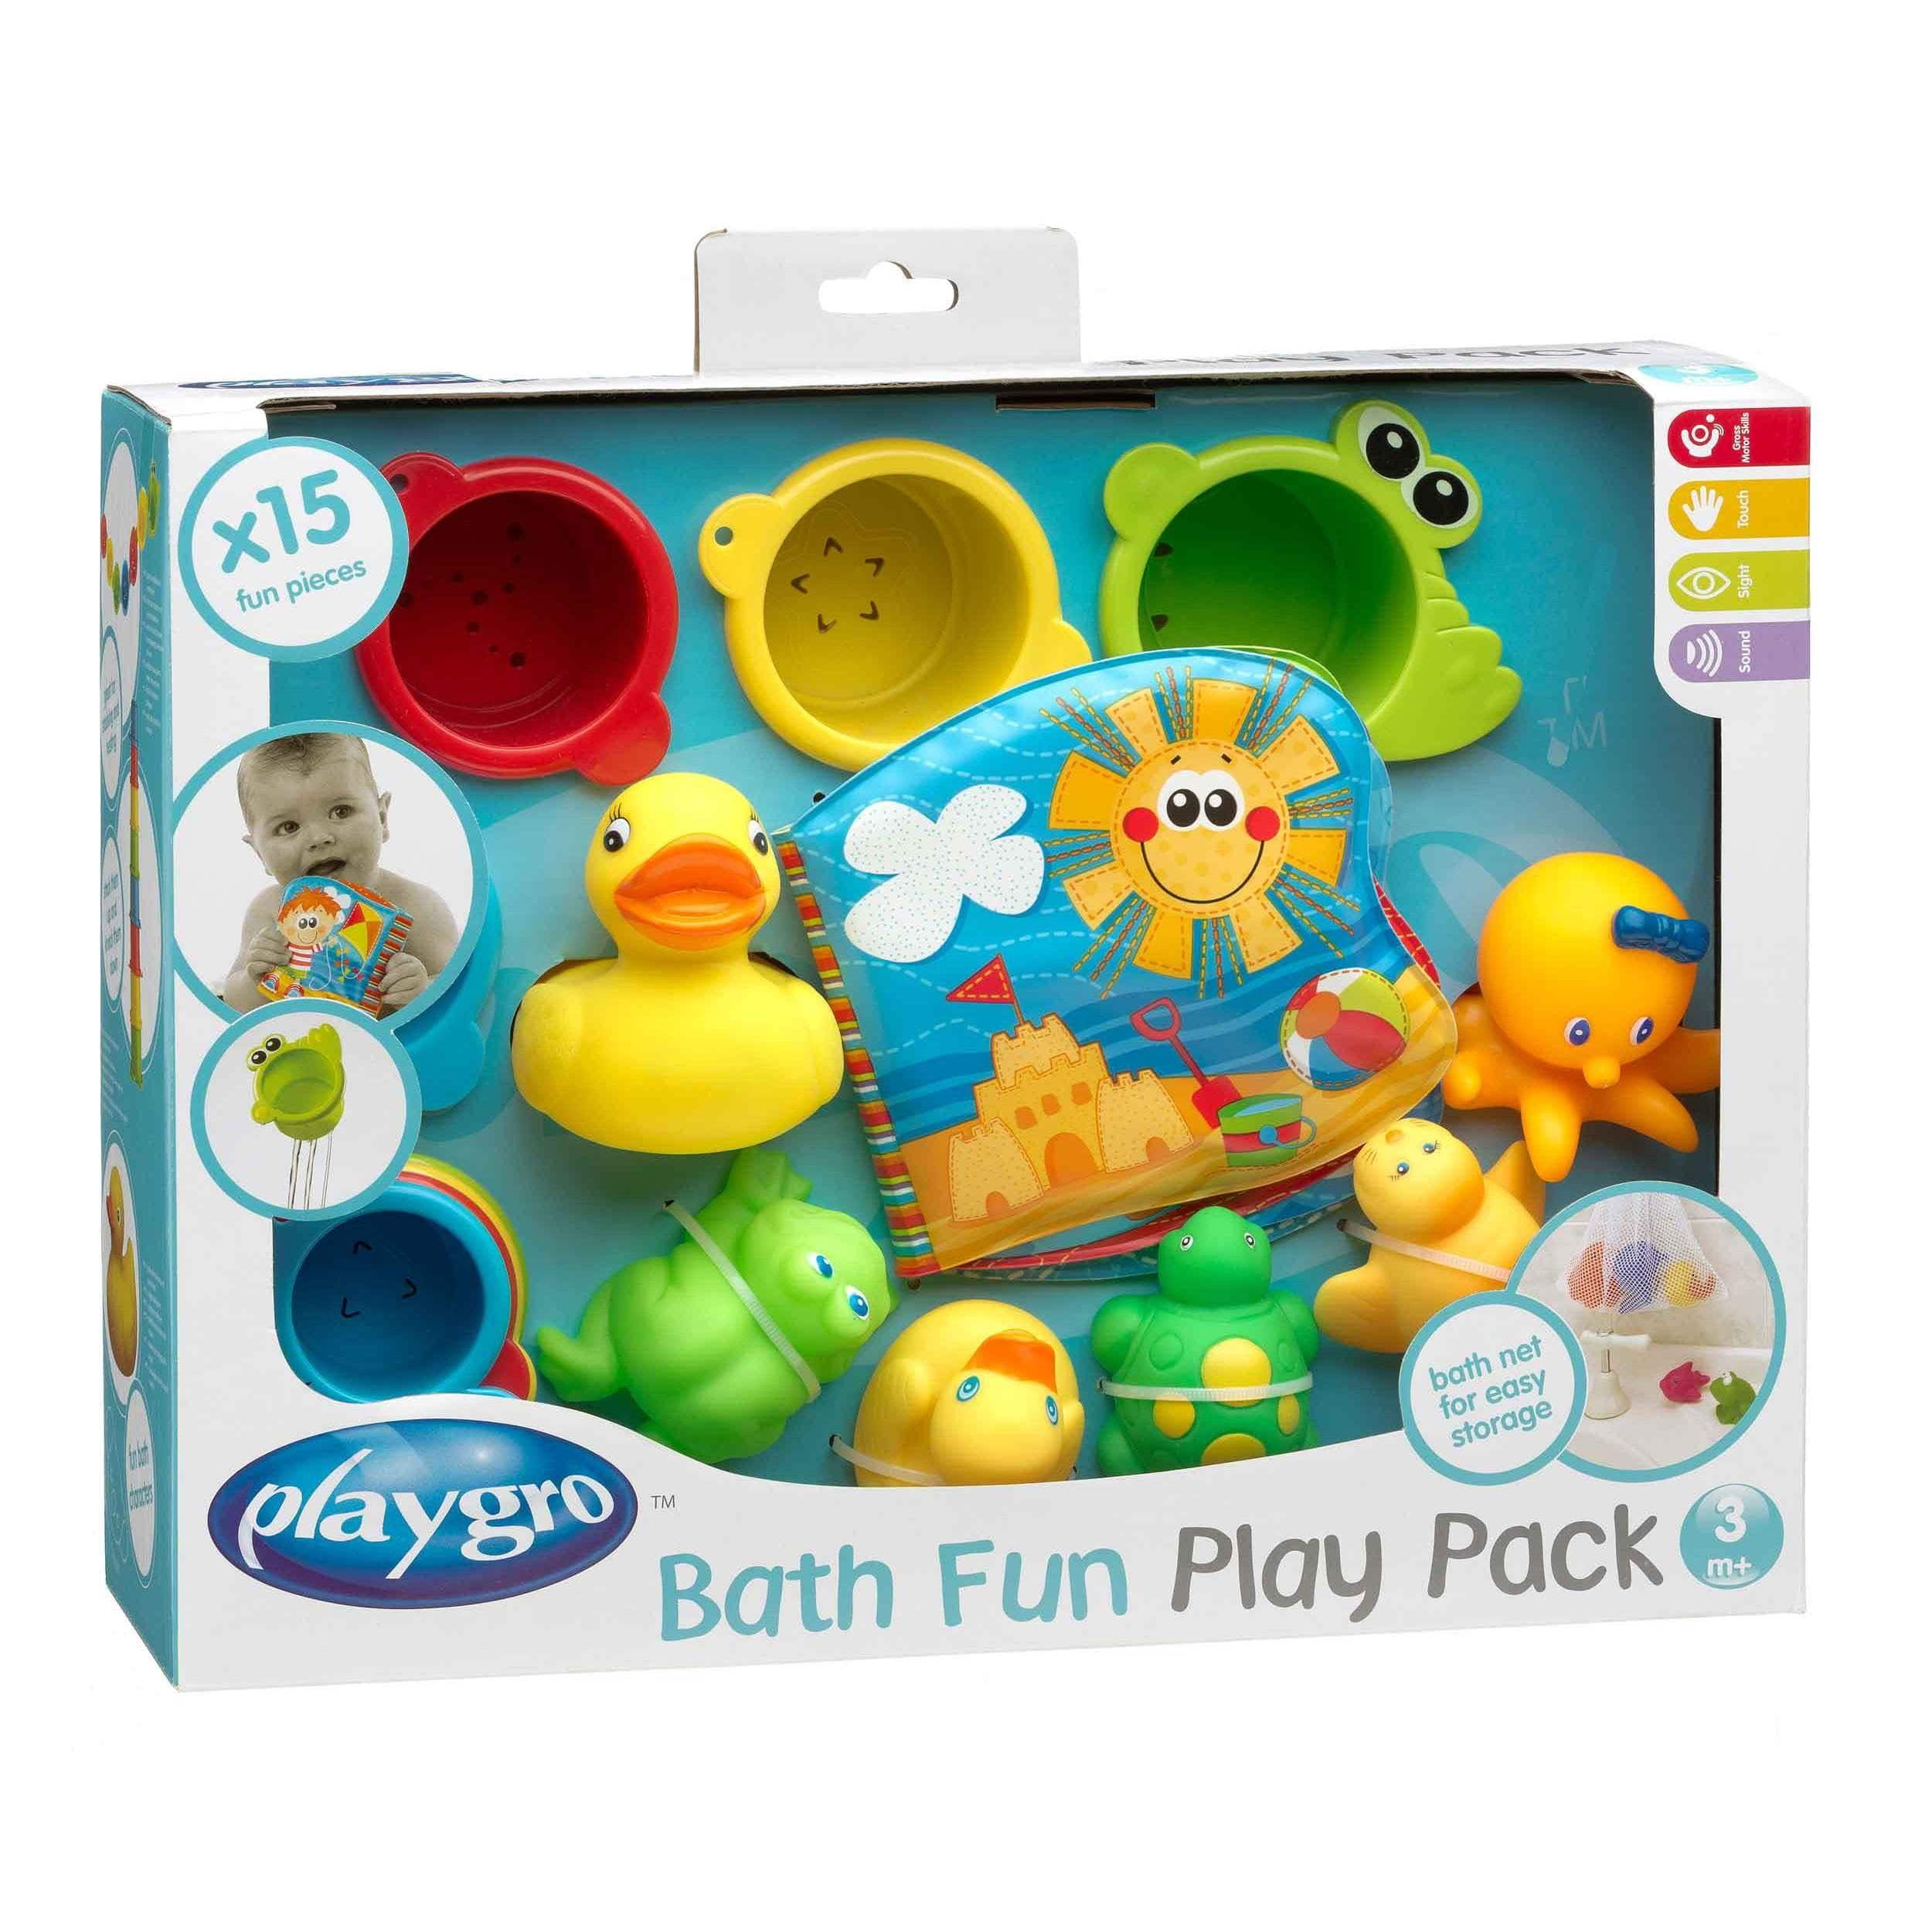 Playgro Bath Fun Gift Pack Toy Toddler Colorful Educational Children Kids Play 